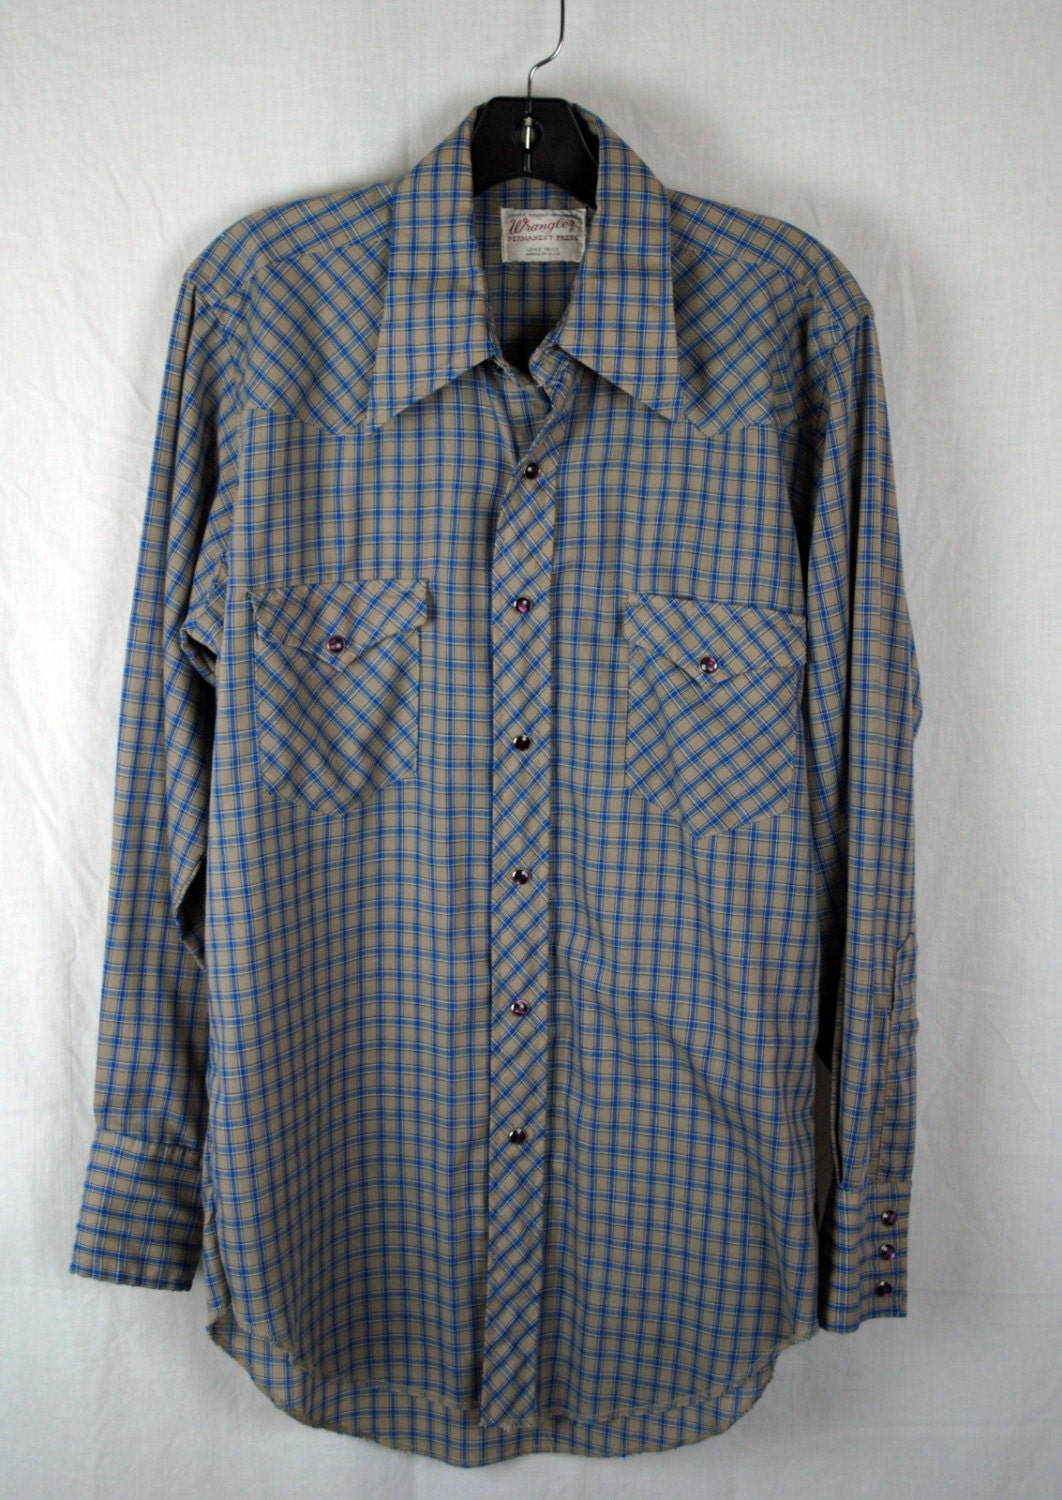 Vintage Wrangler Western Shirt Size M Mens by DaughterOfBetty